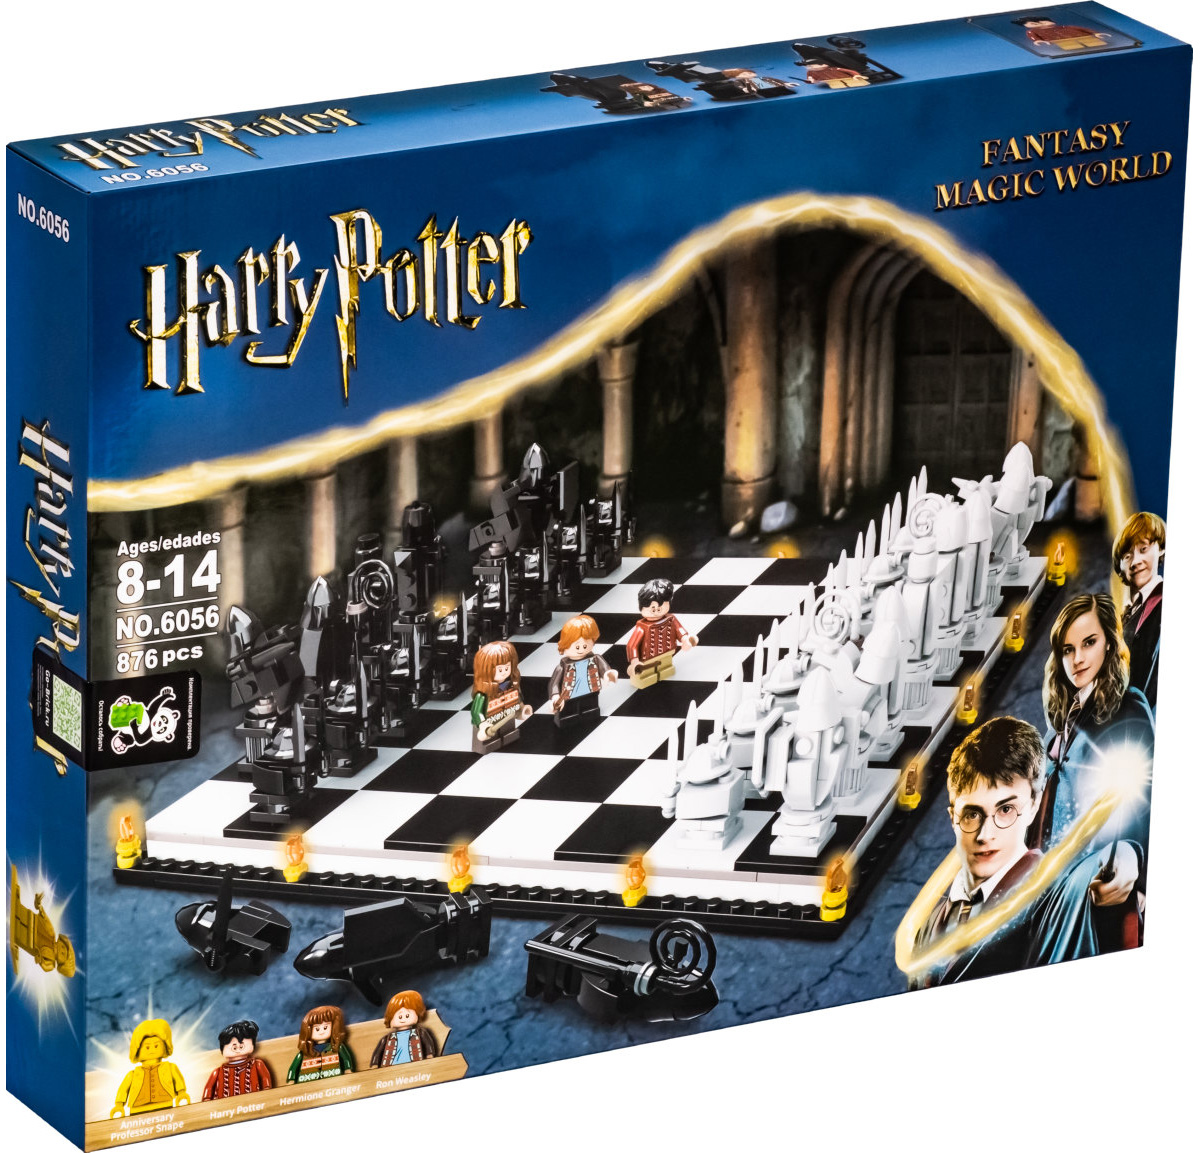 How can 76392 Harry Potter Lego set delight any HP fanatics: 10 magical reasons to gift this chess set